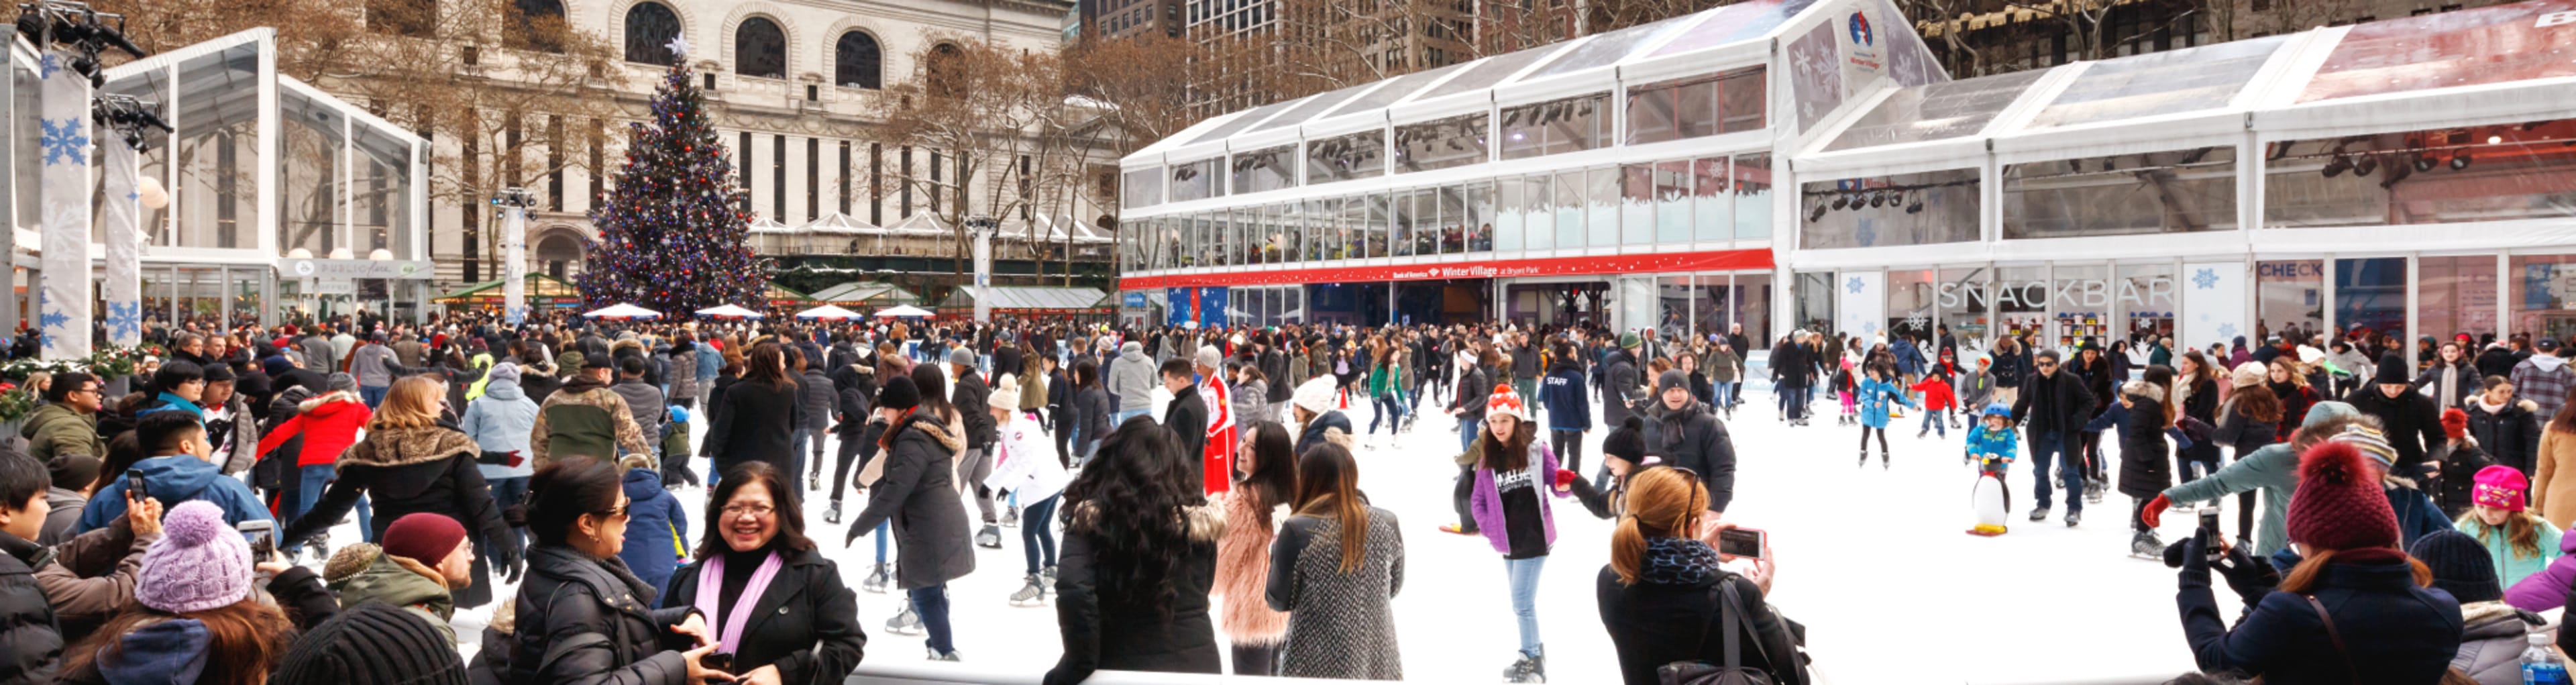 Bank of America Winter Village at Bryant Park Ice Rink